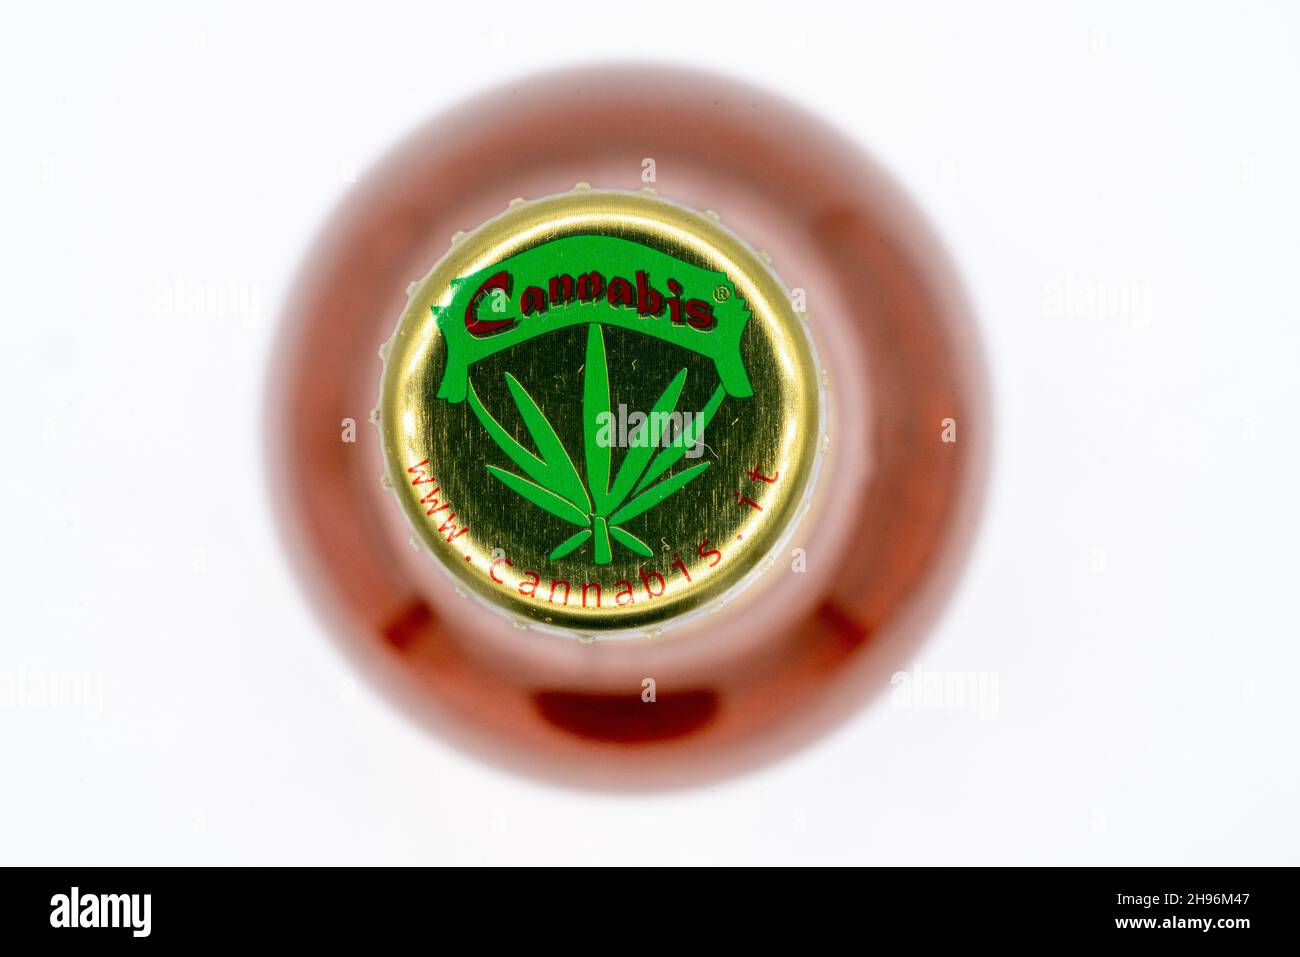 Lloret de Mar, Spain - 12.04.2021: Cannabis red power beer bottle on light background, top view Stock Photo